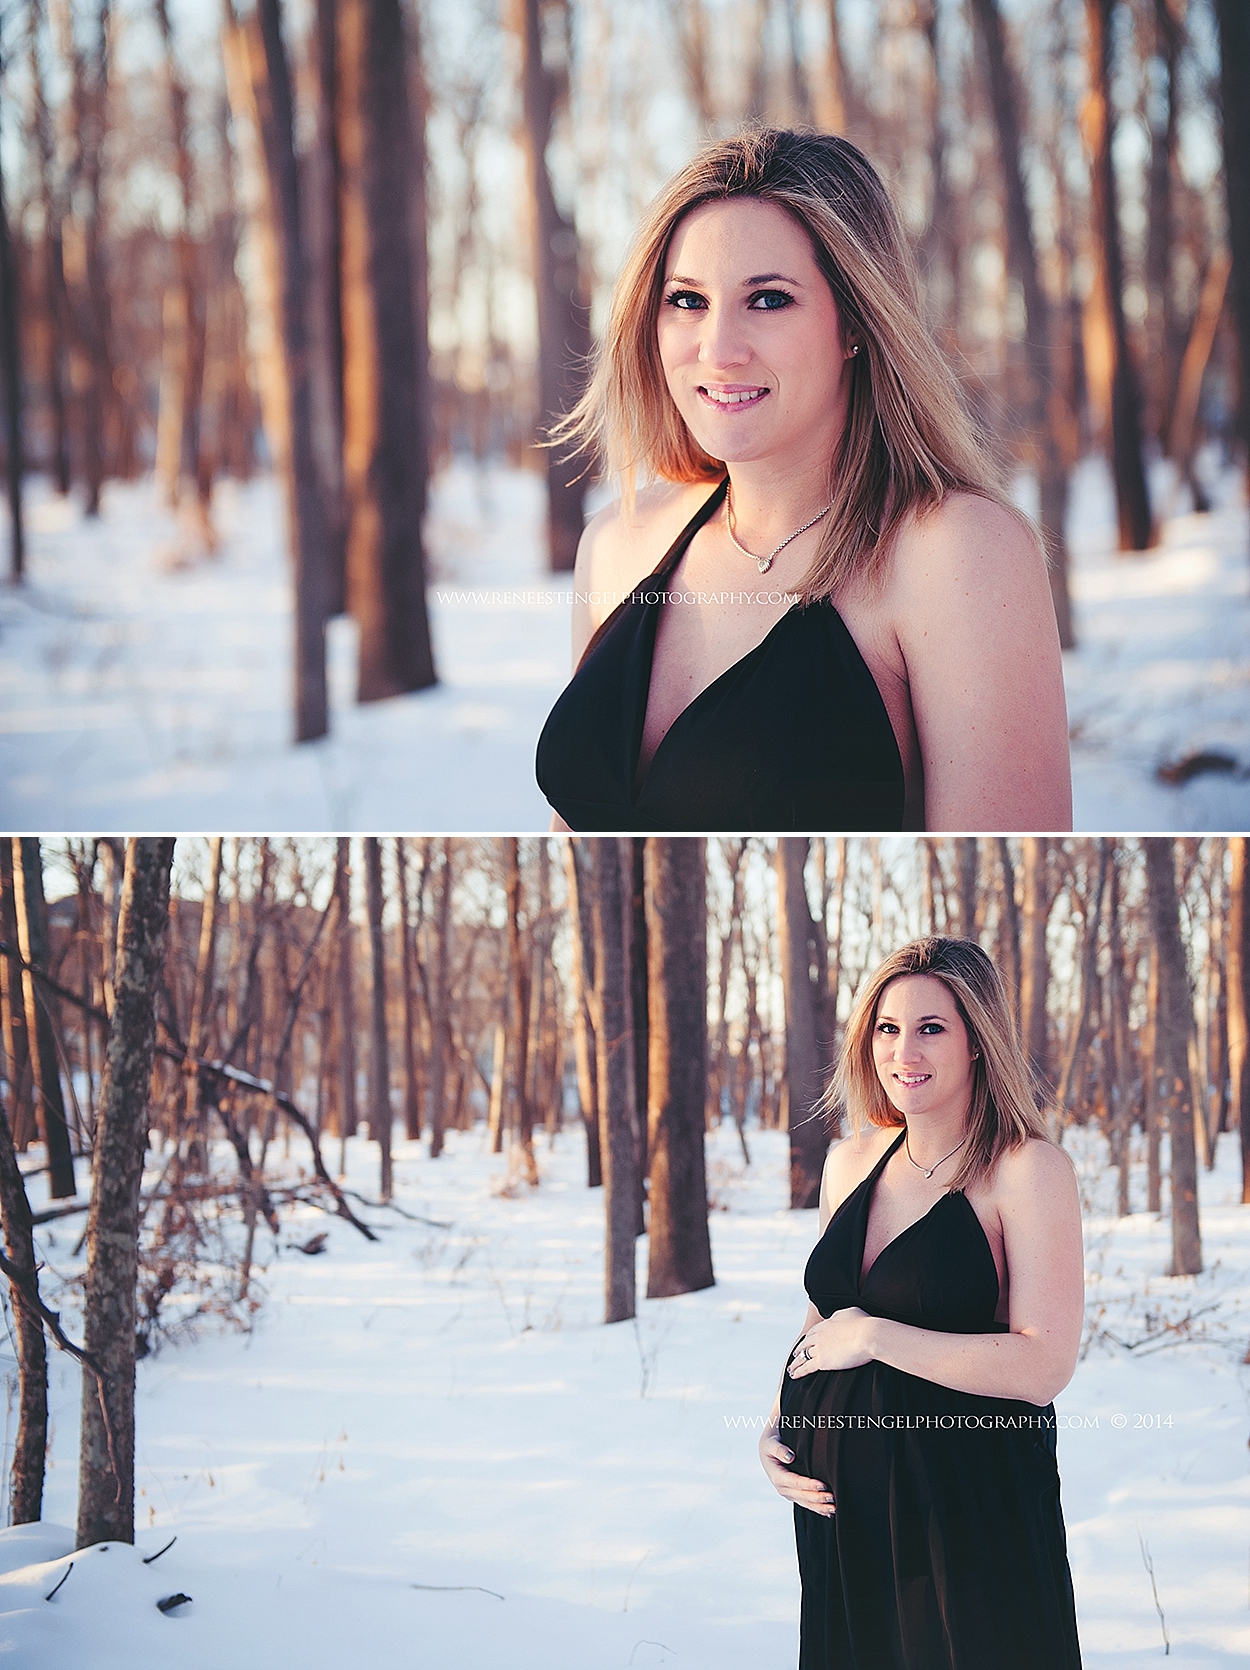 RENEE STENGEL Photography | Charlotte Underwater and Portrait Photographer | Winter Snow Maternity Outdoor Session